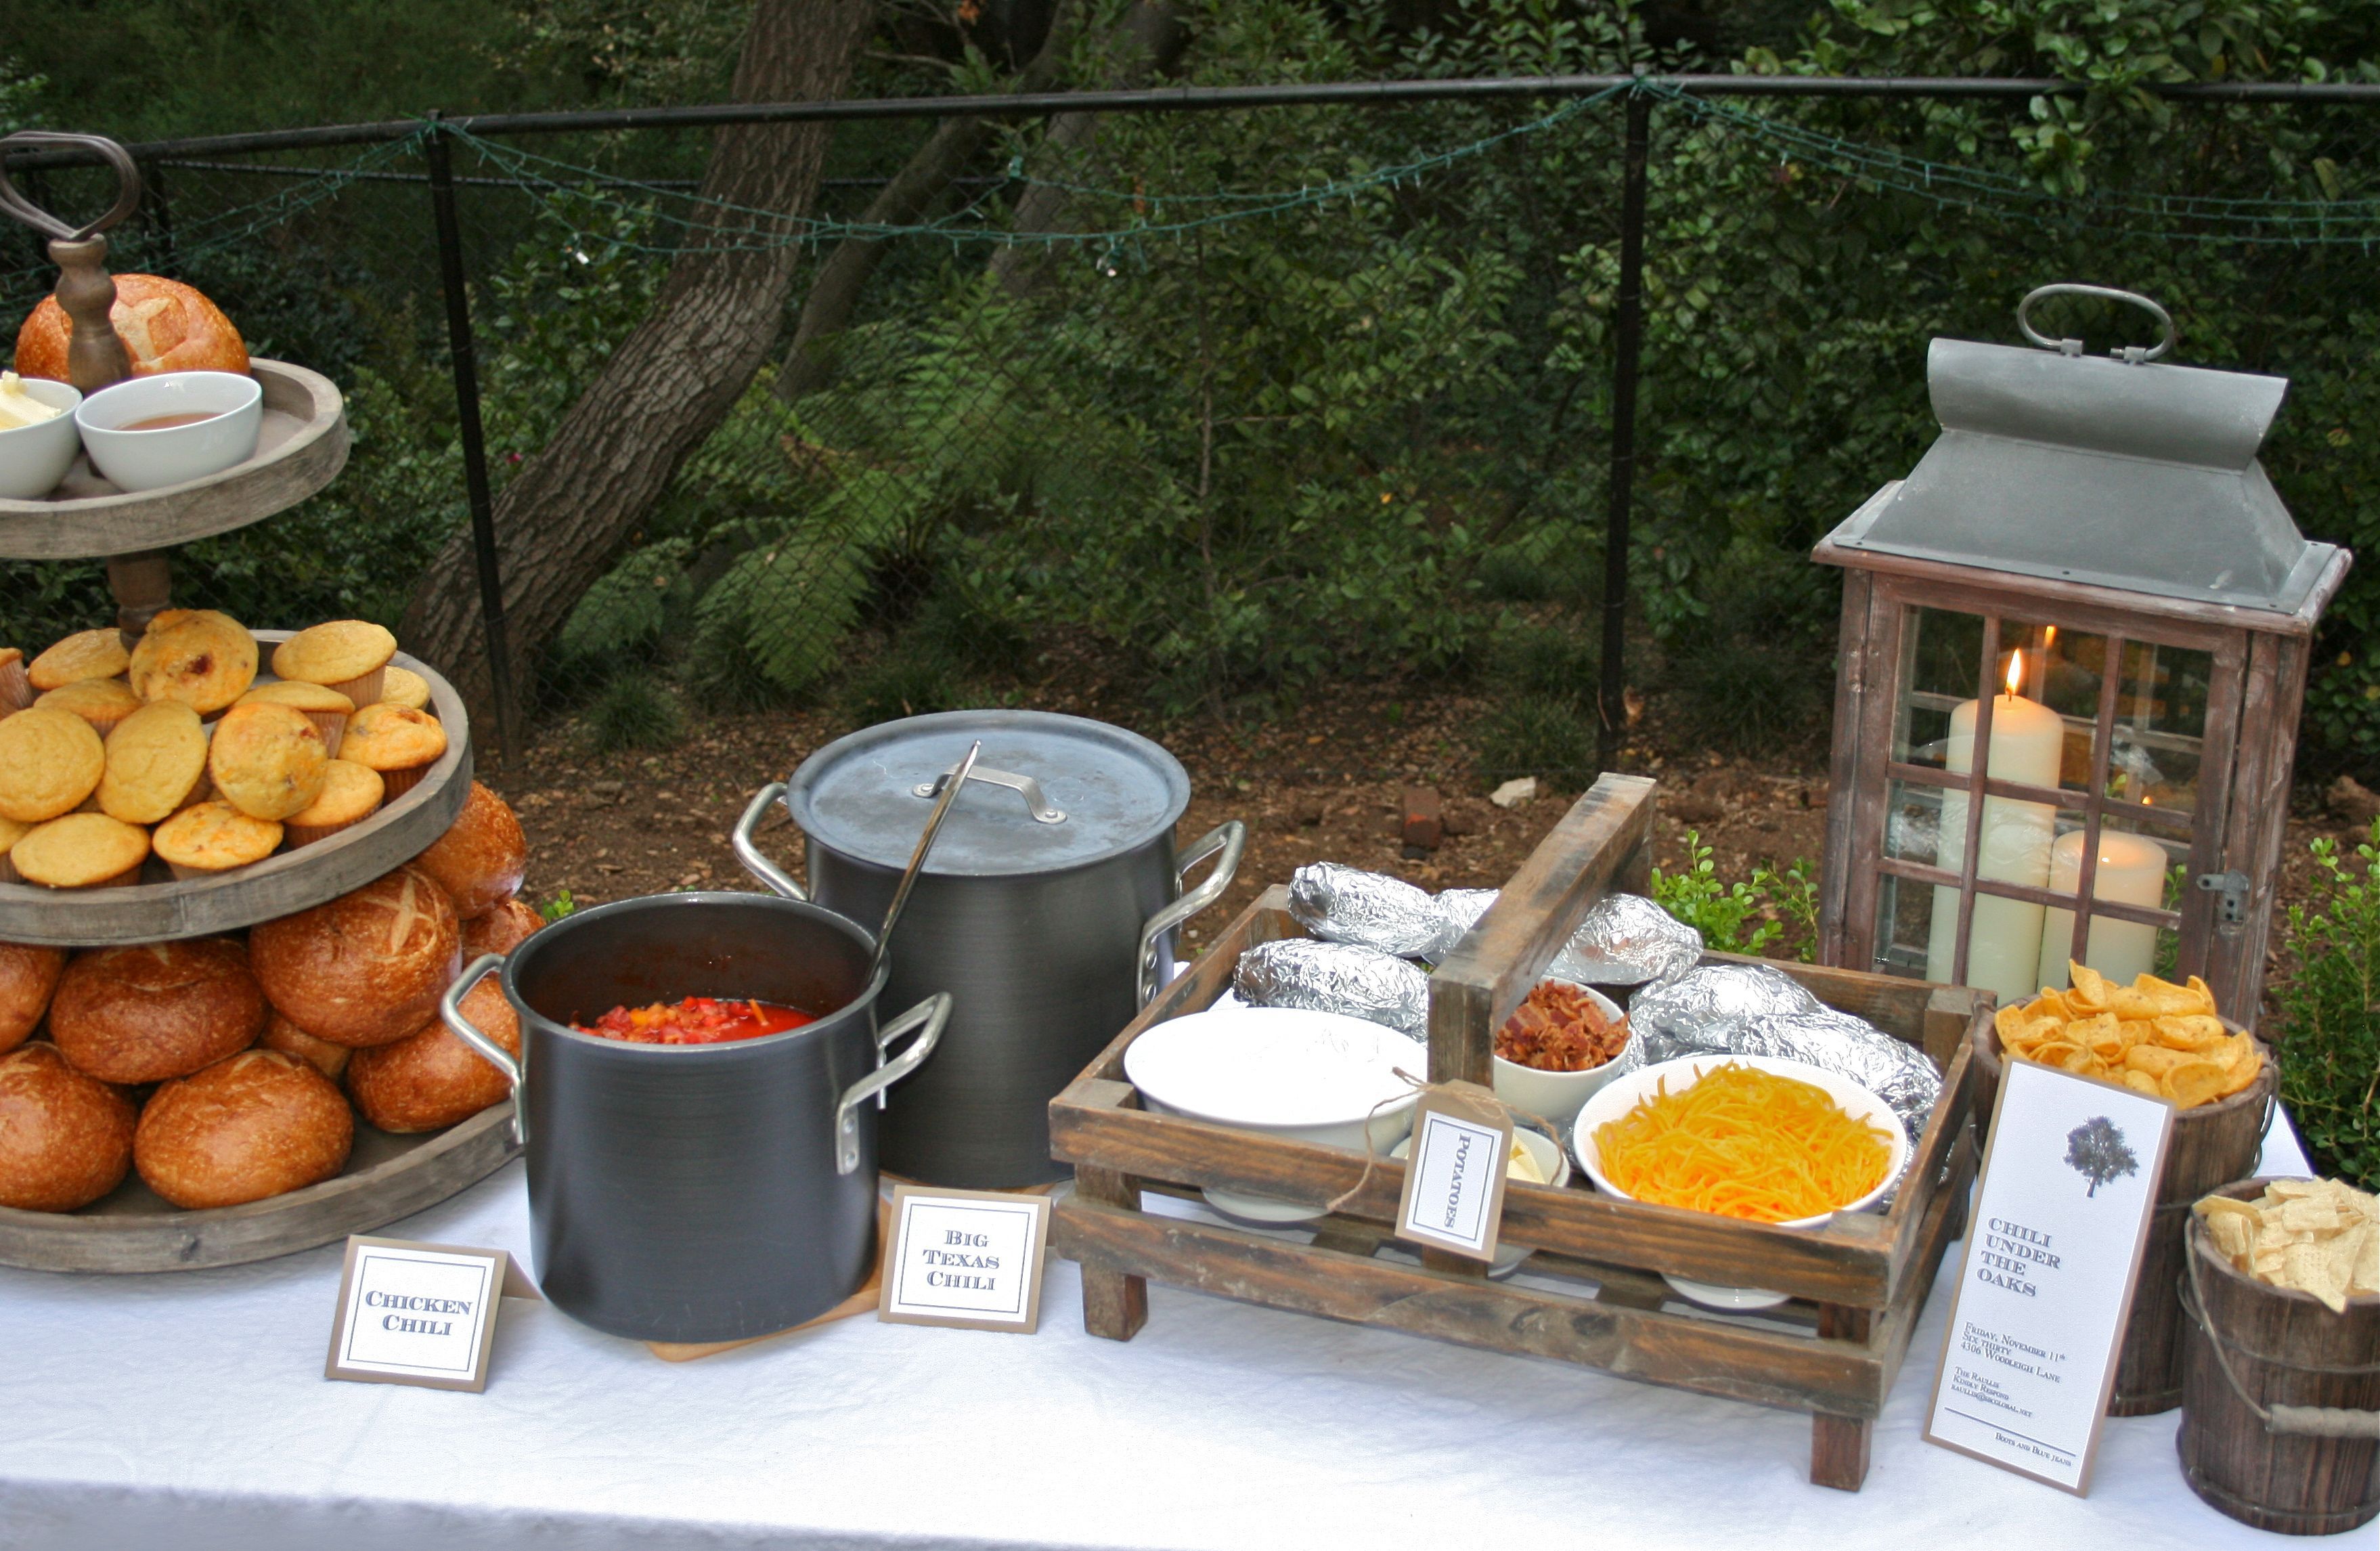 Chili Under the Oaks:  Fall Food Party. This would be awesome as a chili cook off/pot luck style !!